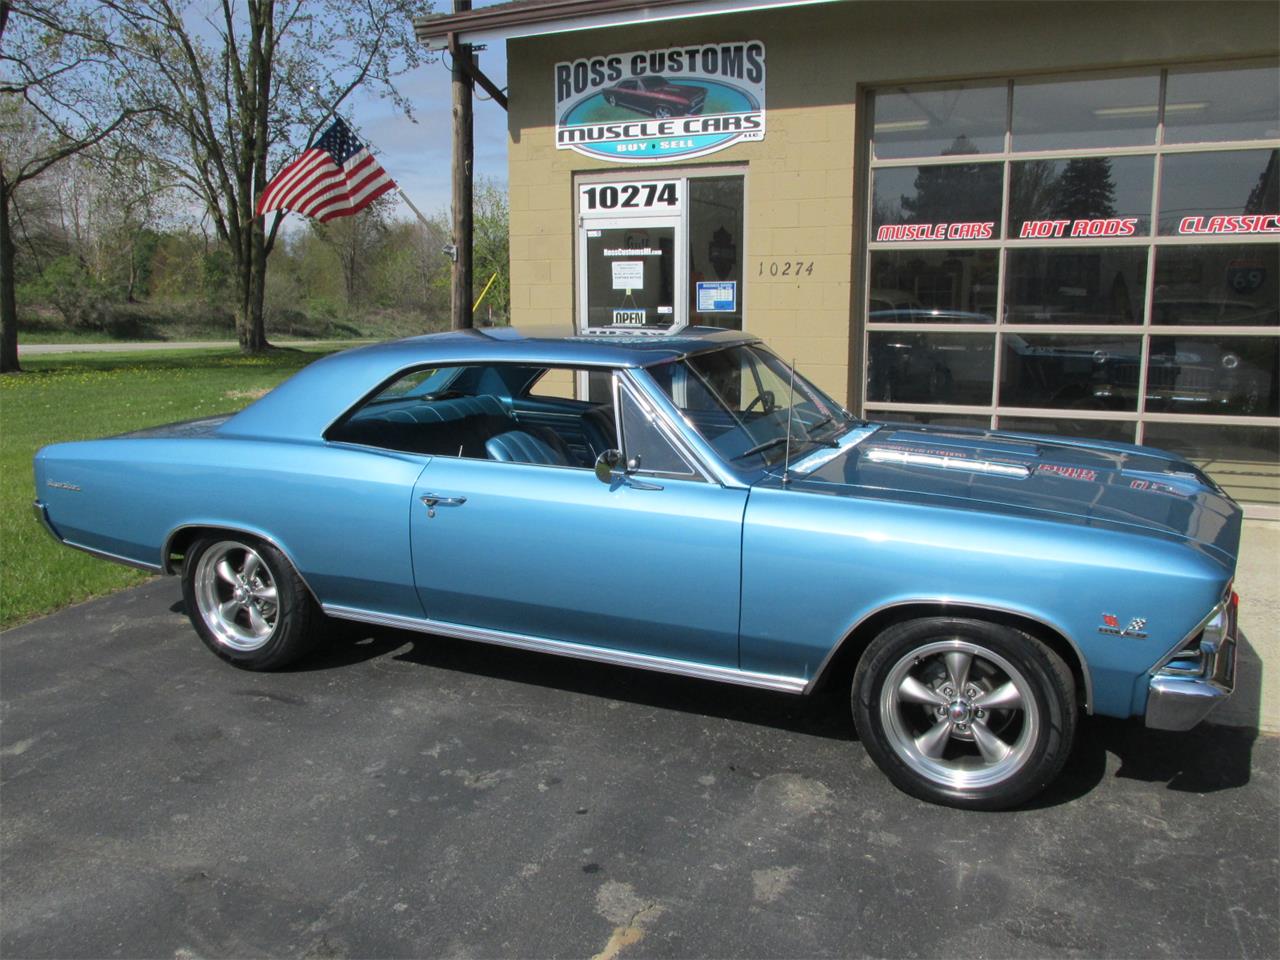 Marina Blue 1966 Chevrolet Chevelle SS for sale located in Goodrich, Michig...